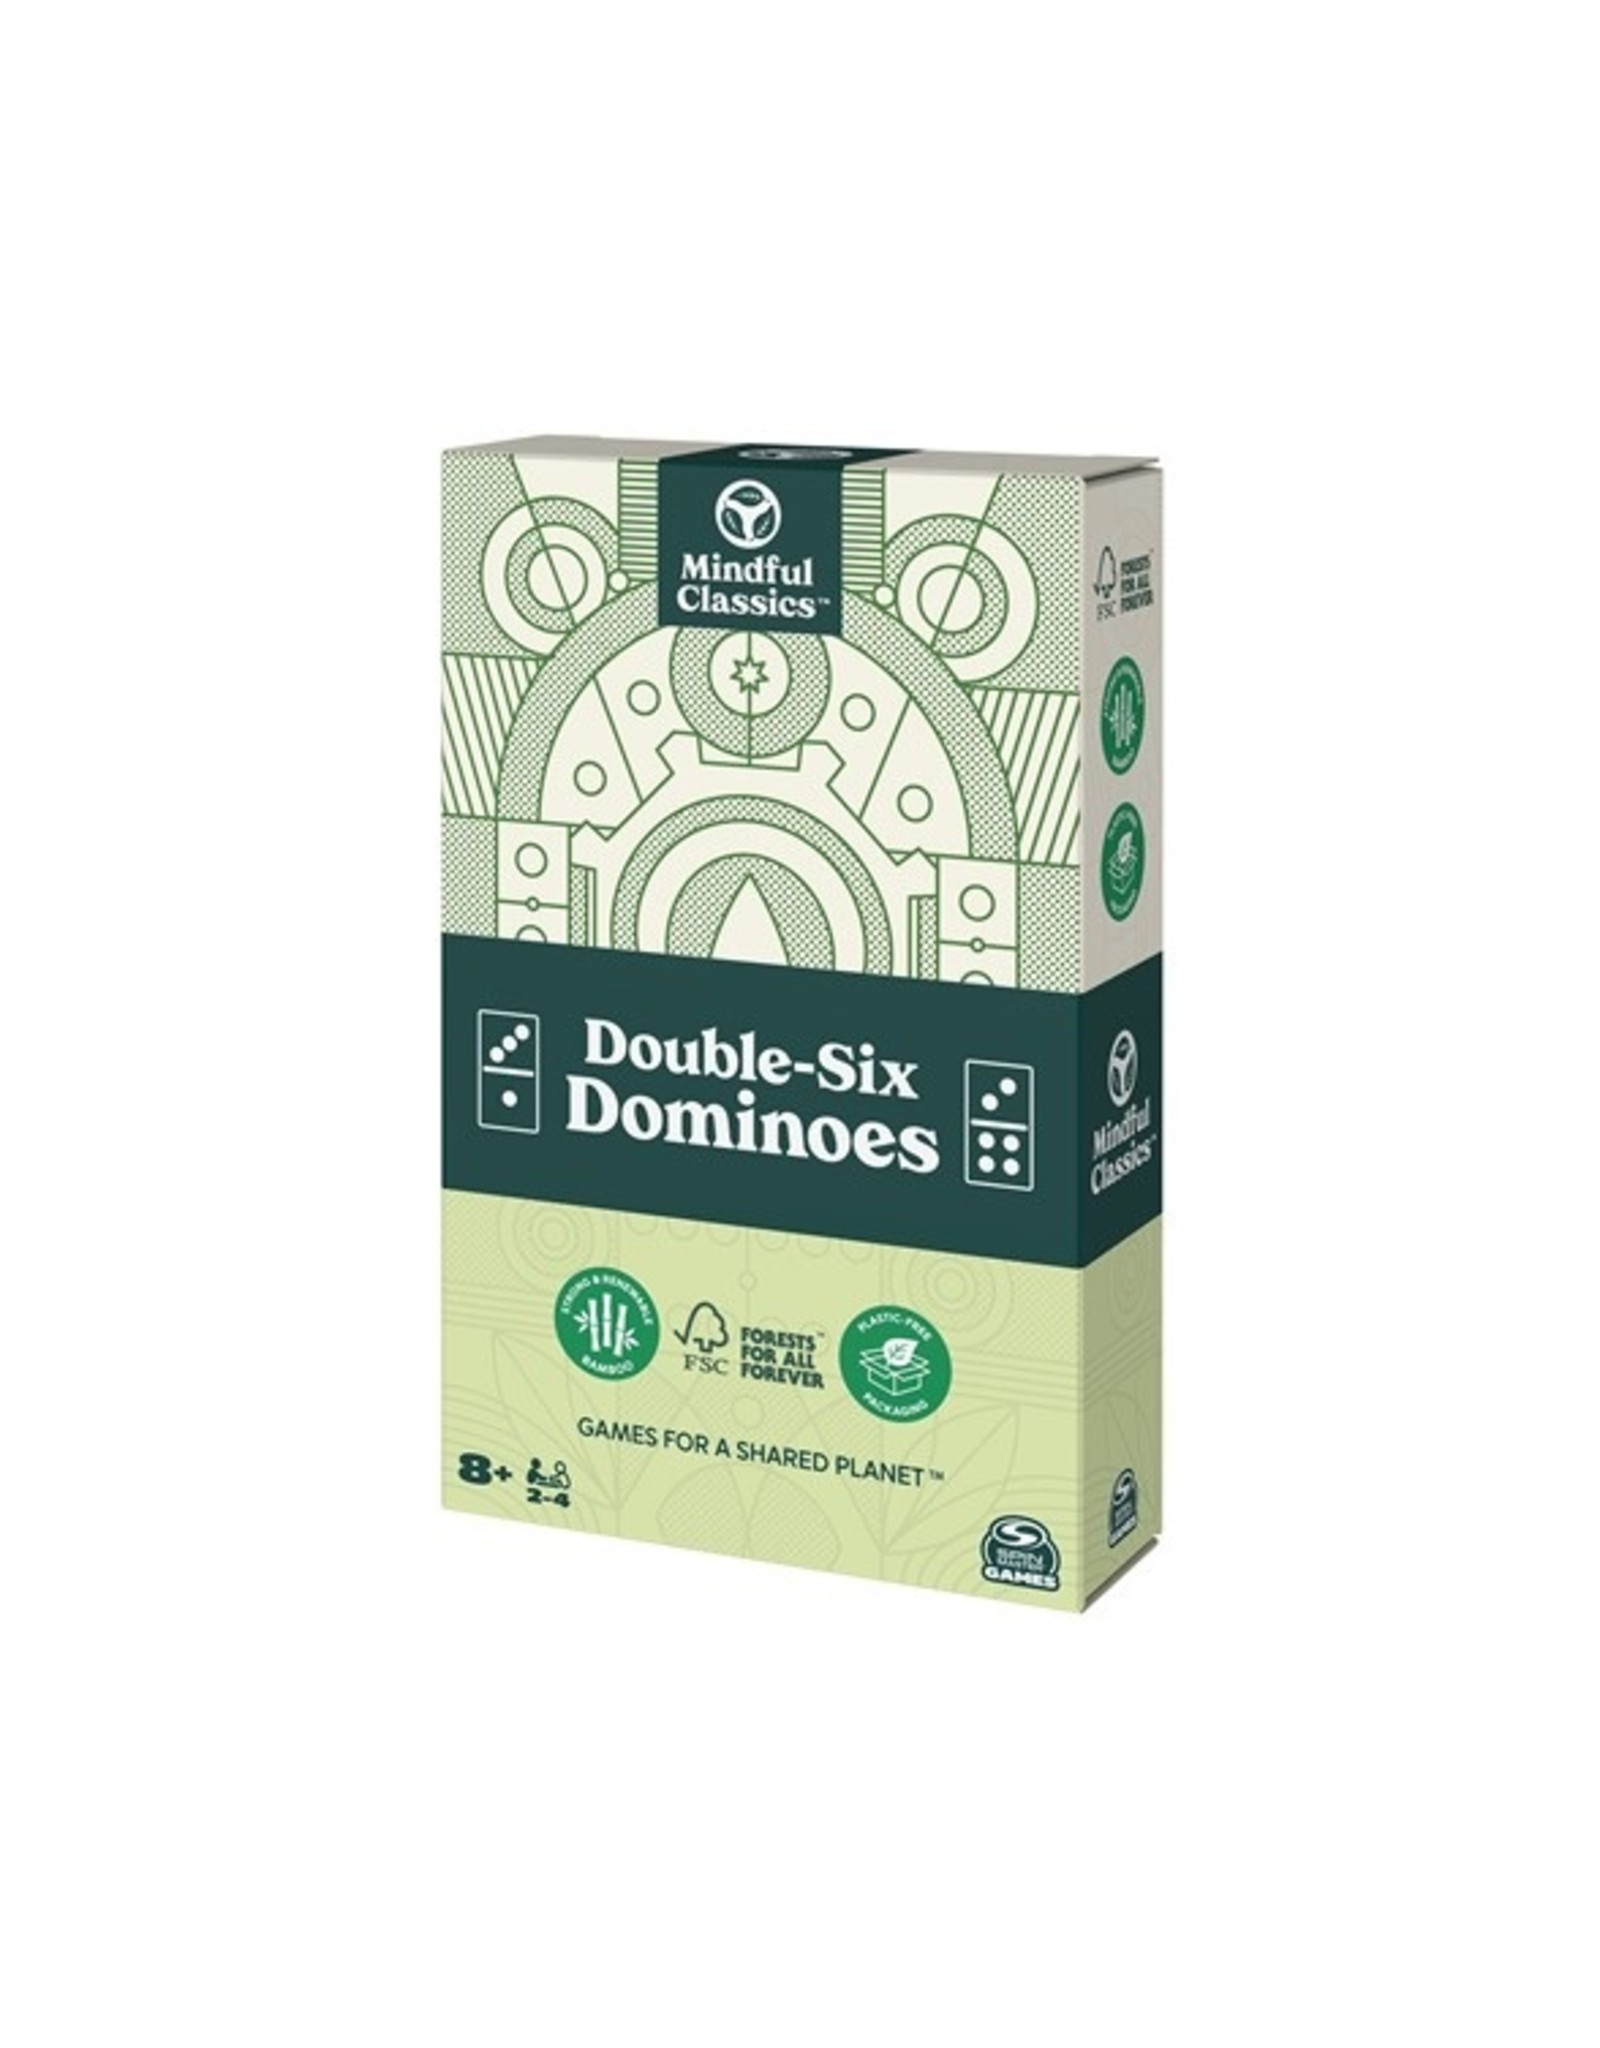 Spinmaster Double-Six Dominoes (Mindful Classics)